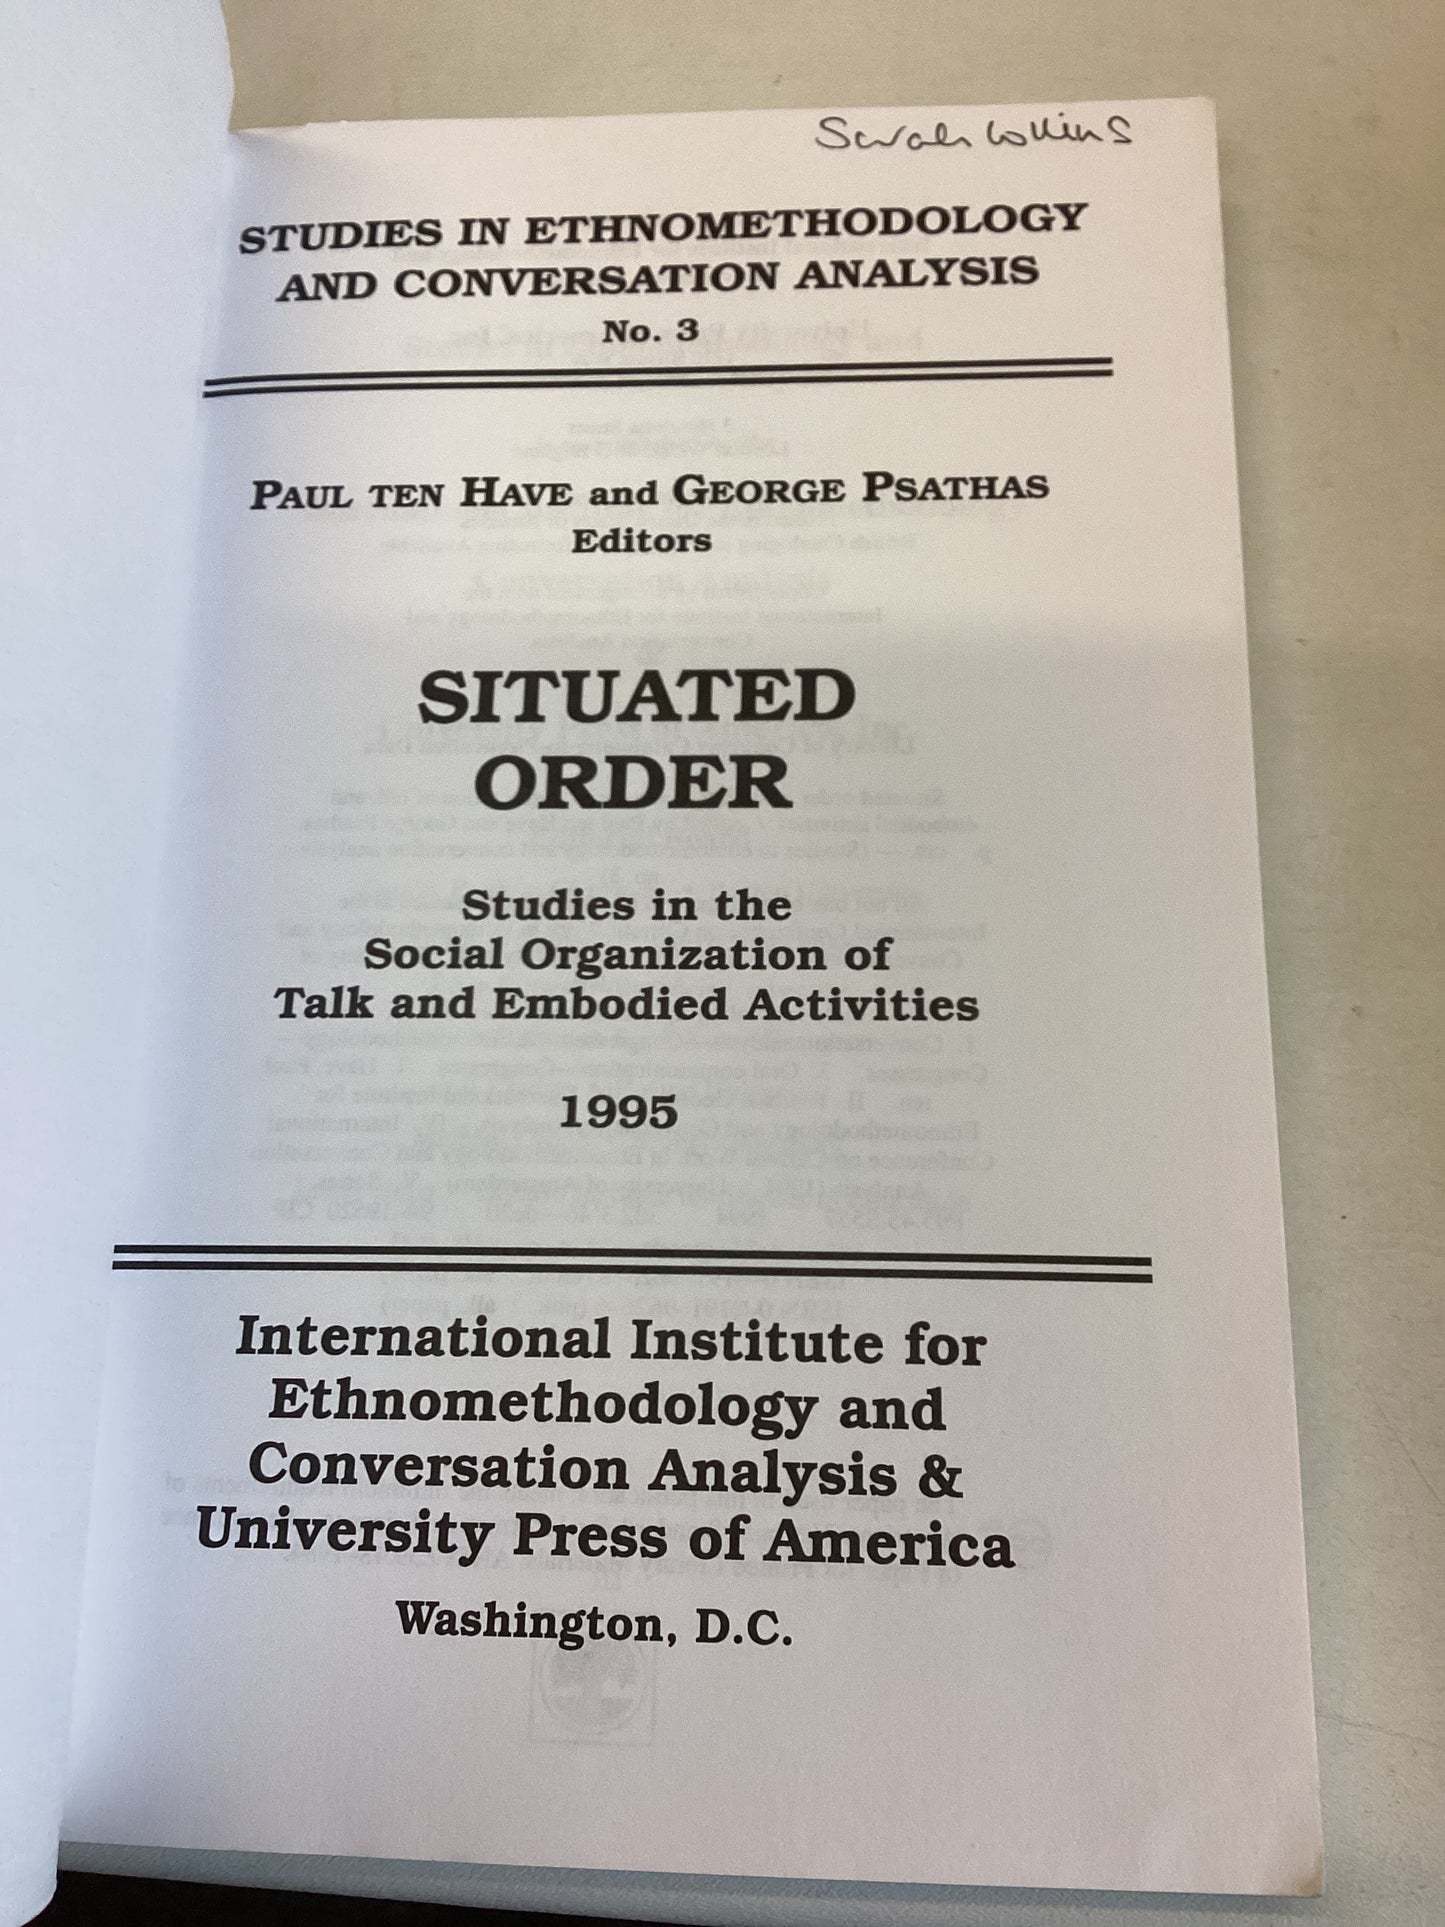 Situated Order Studies in the Social Organization of Talk and Embodied Activities 1995